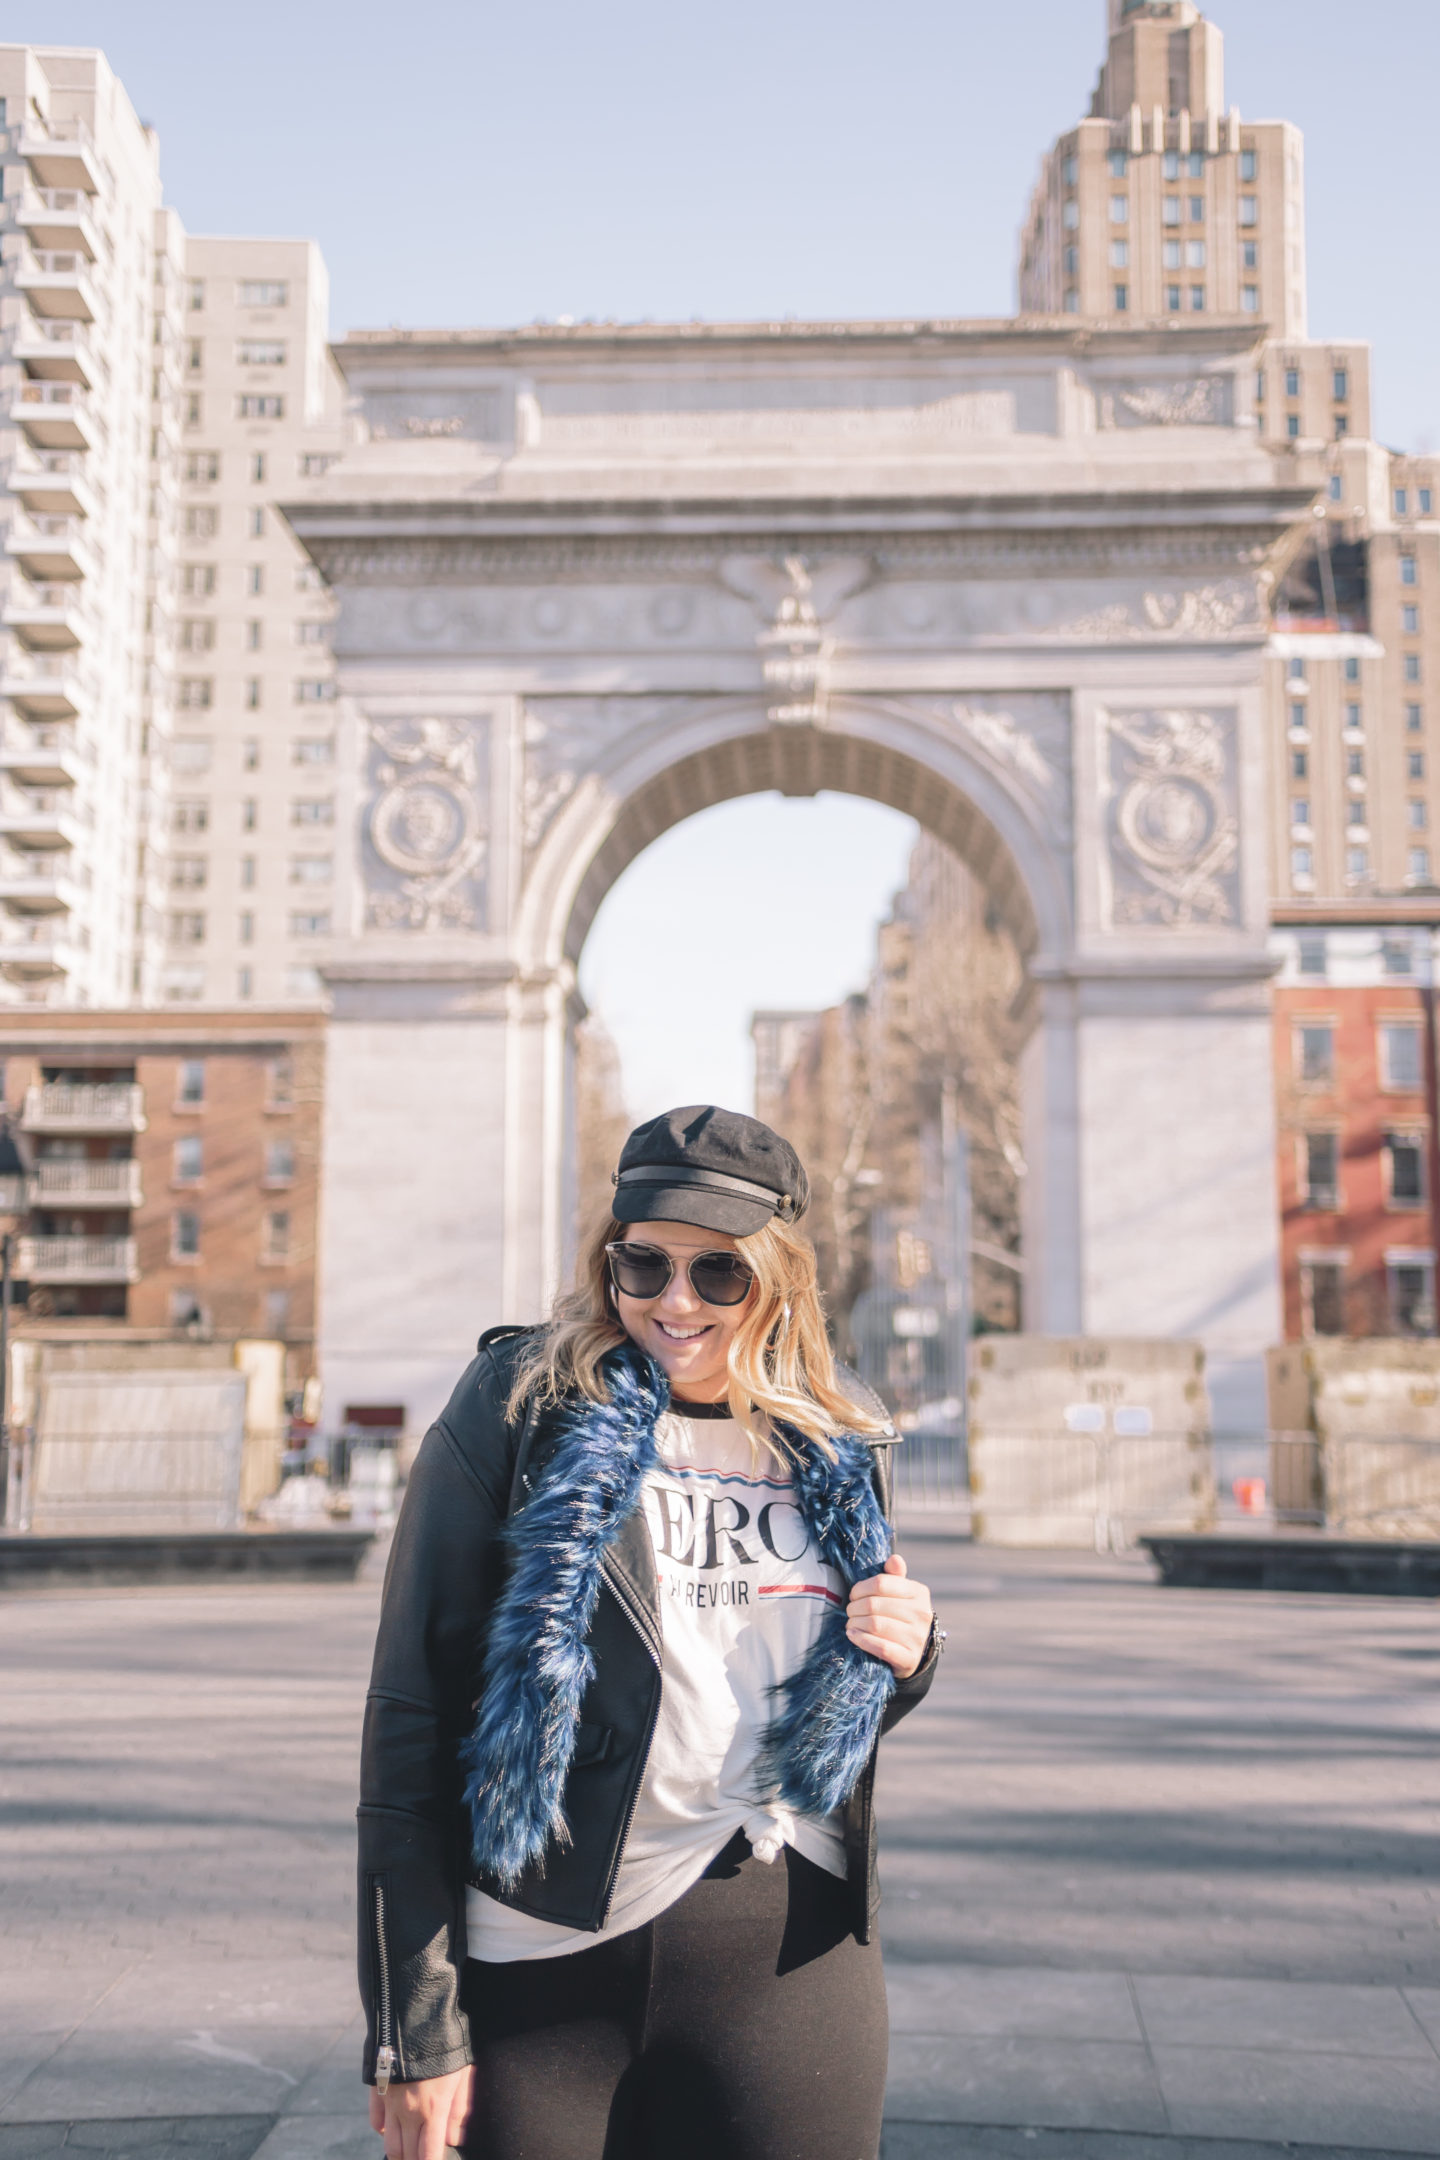 Flare Pants at NYFW, washington square park, winter outfit, nyfw street style